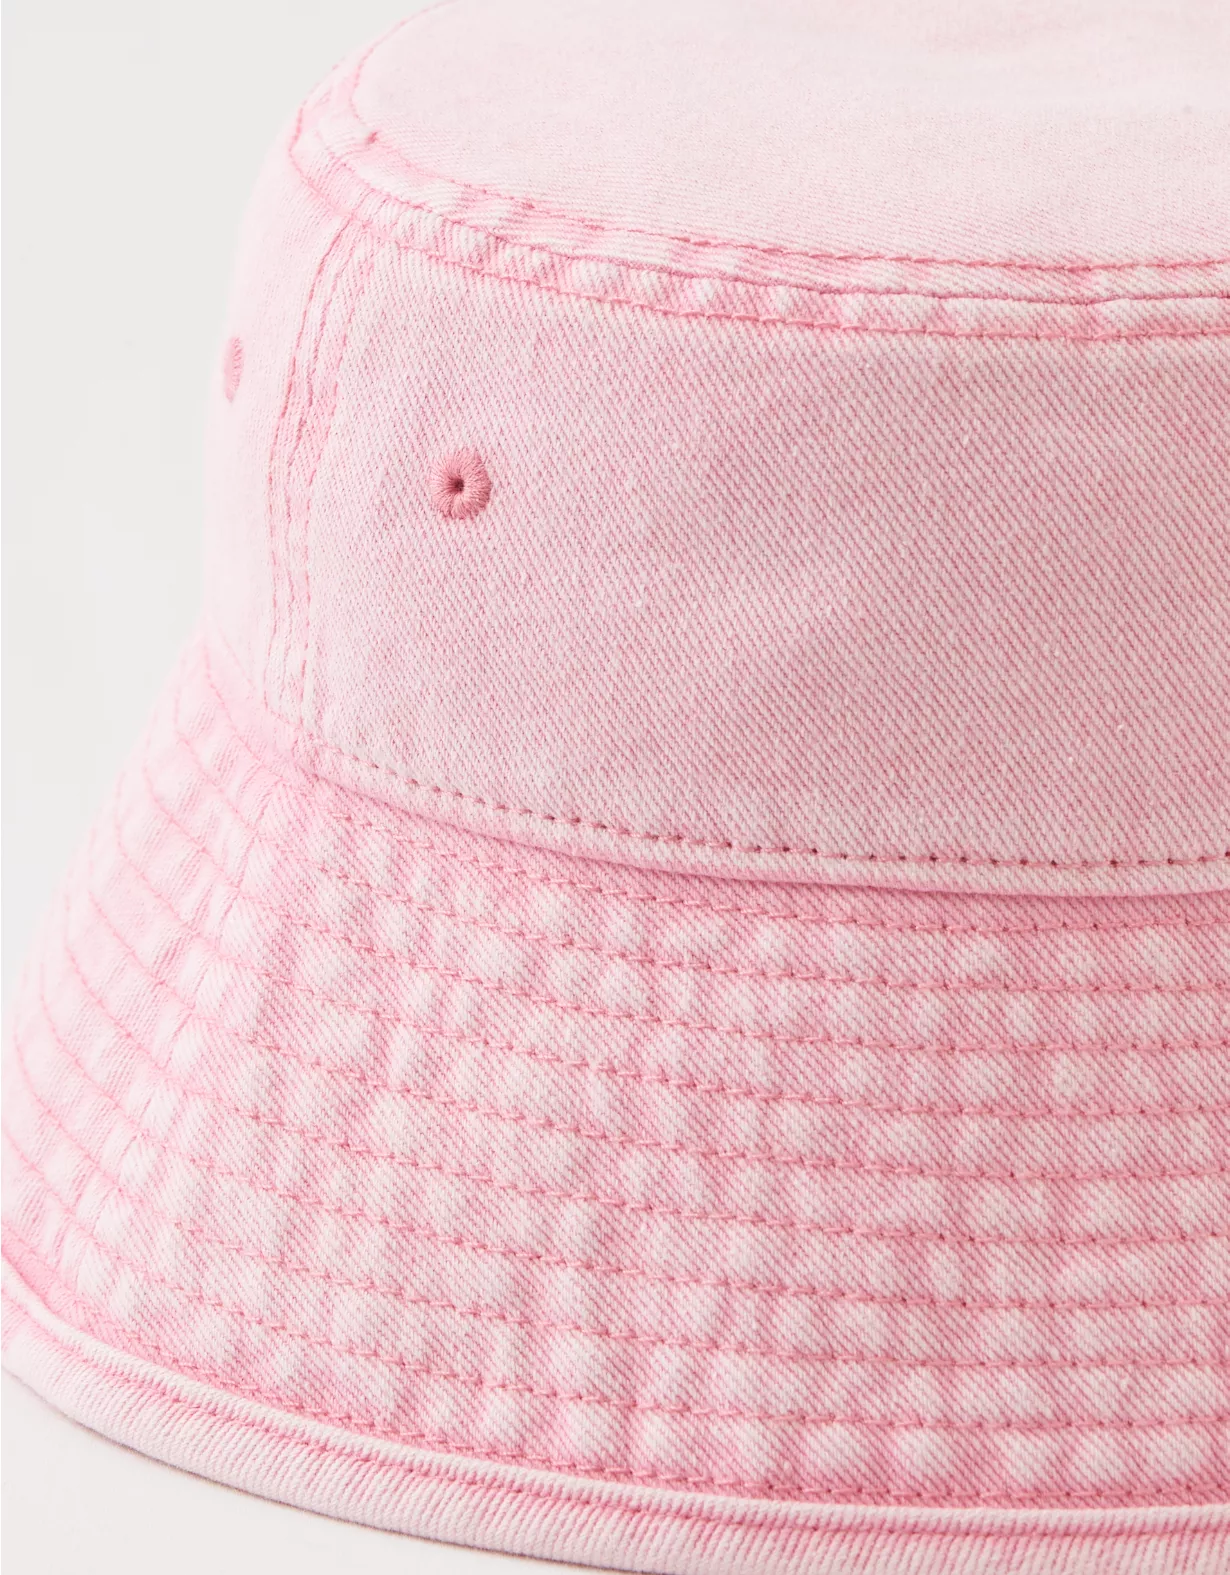 Aerie Rounded Bucket Hat